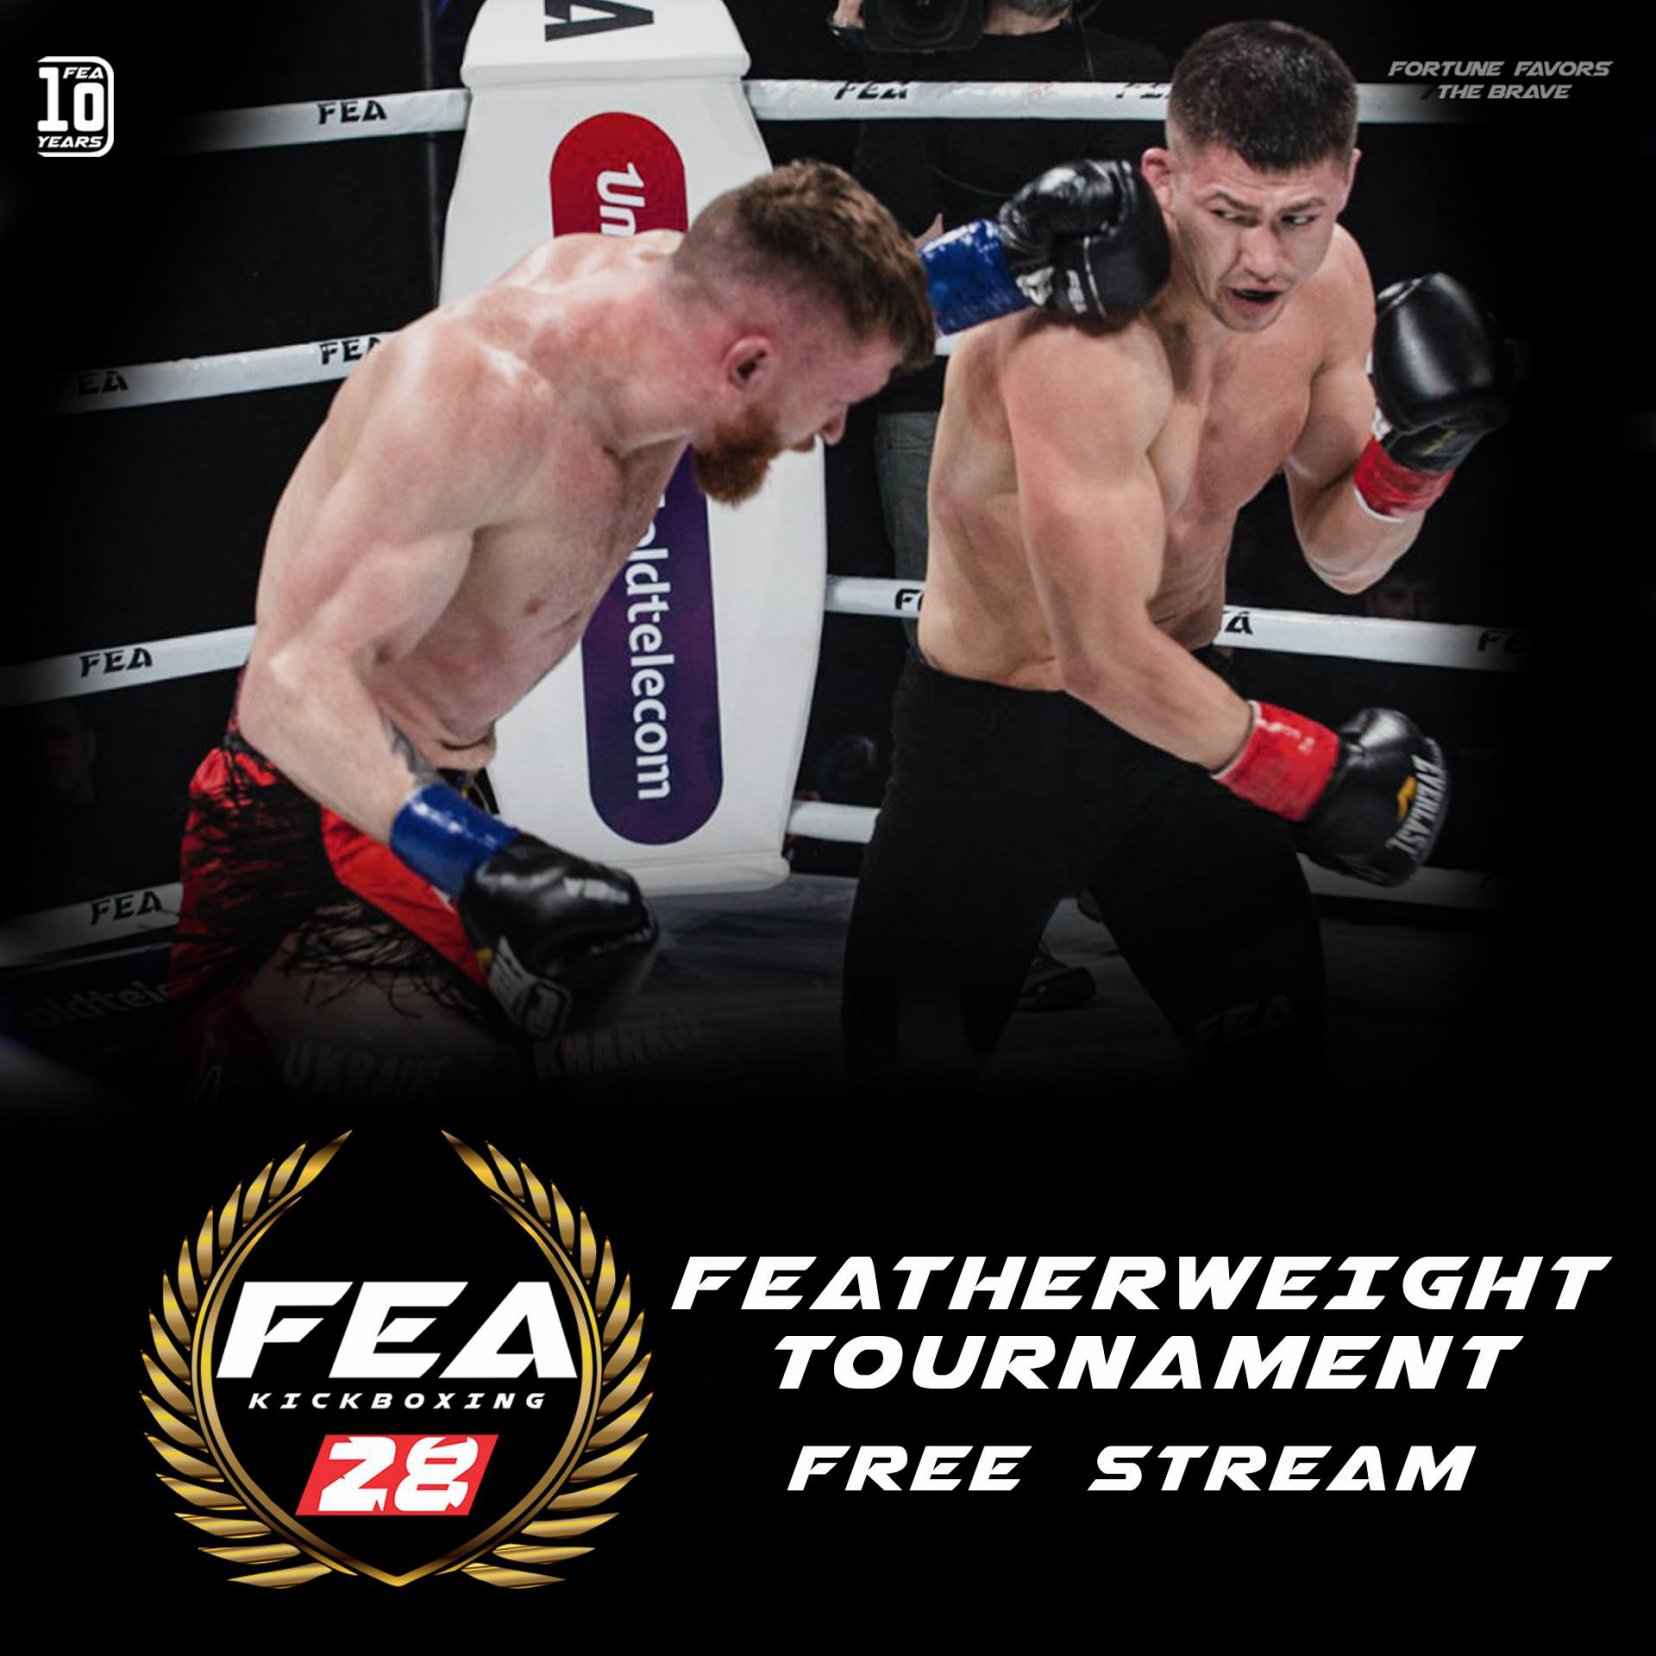 FREE FULL FEA 28 FEATHERWEIGHT TOURNAMENT!!! - fea.md